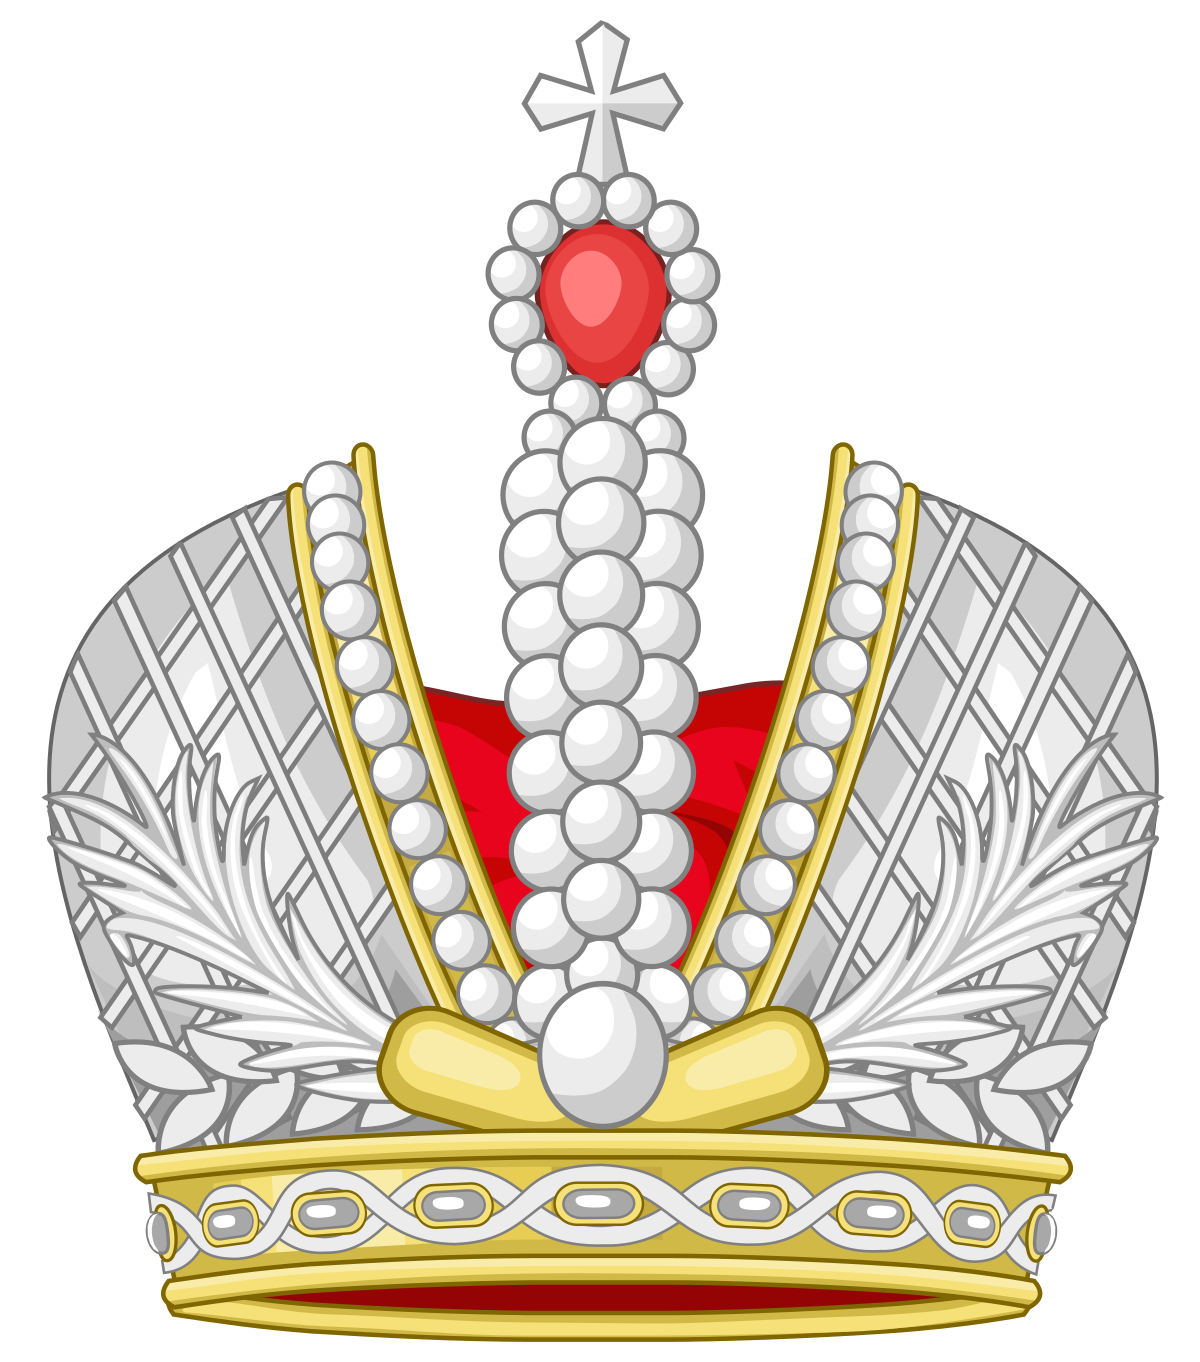 Download File:Heraldic Imperial Crown of Russia.svg - Wikimedia Commons